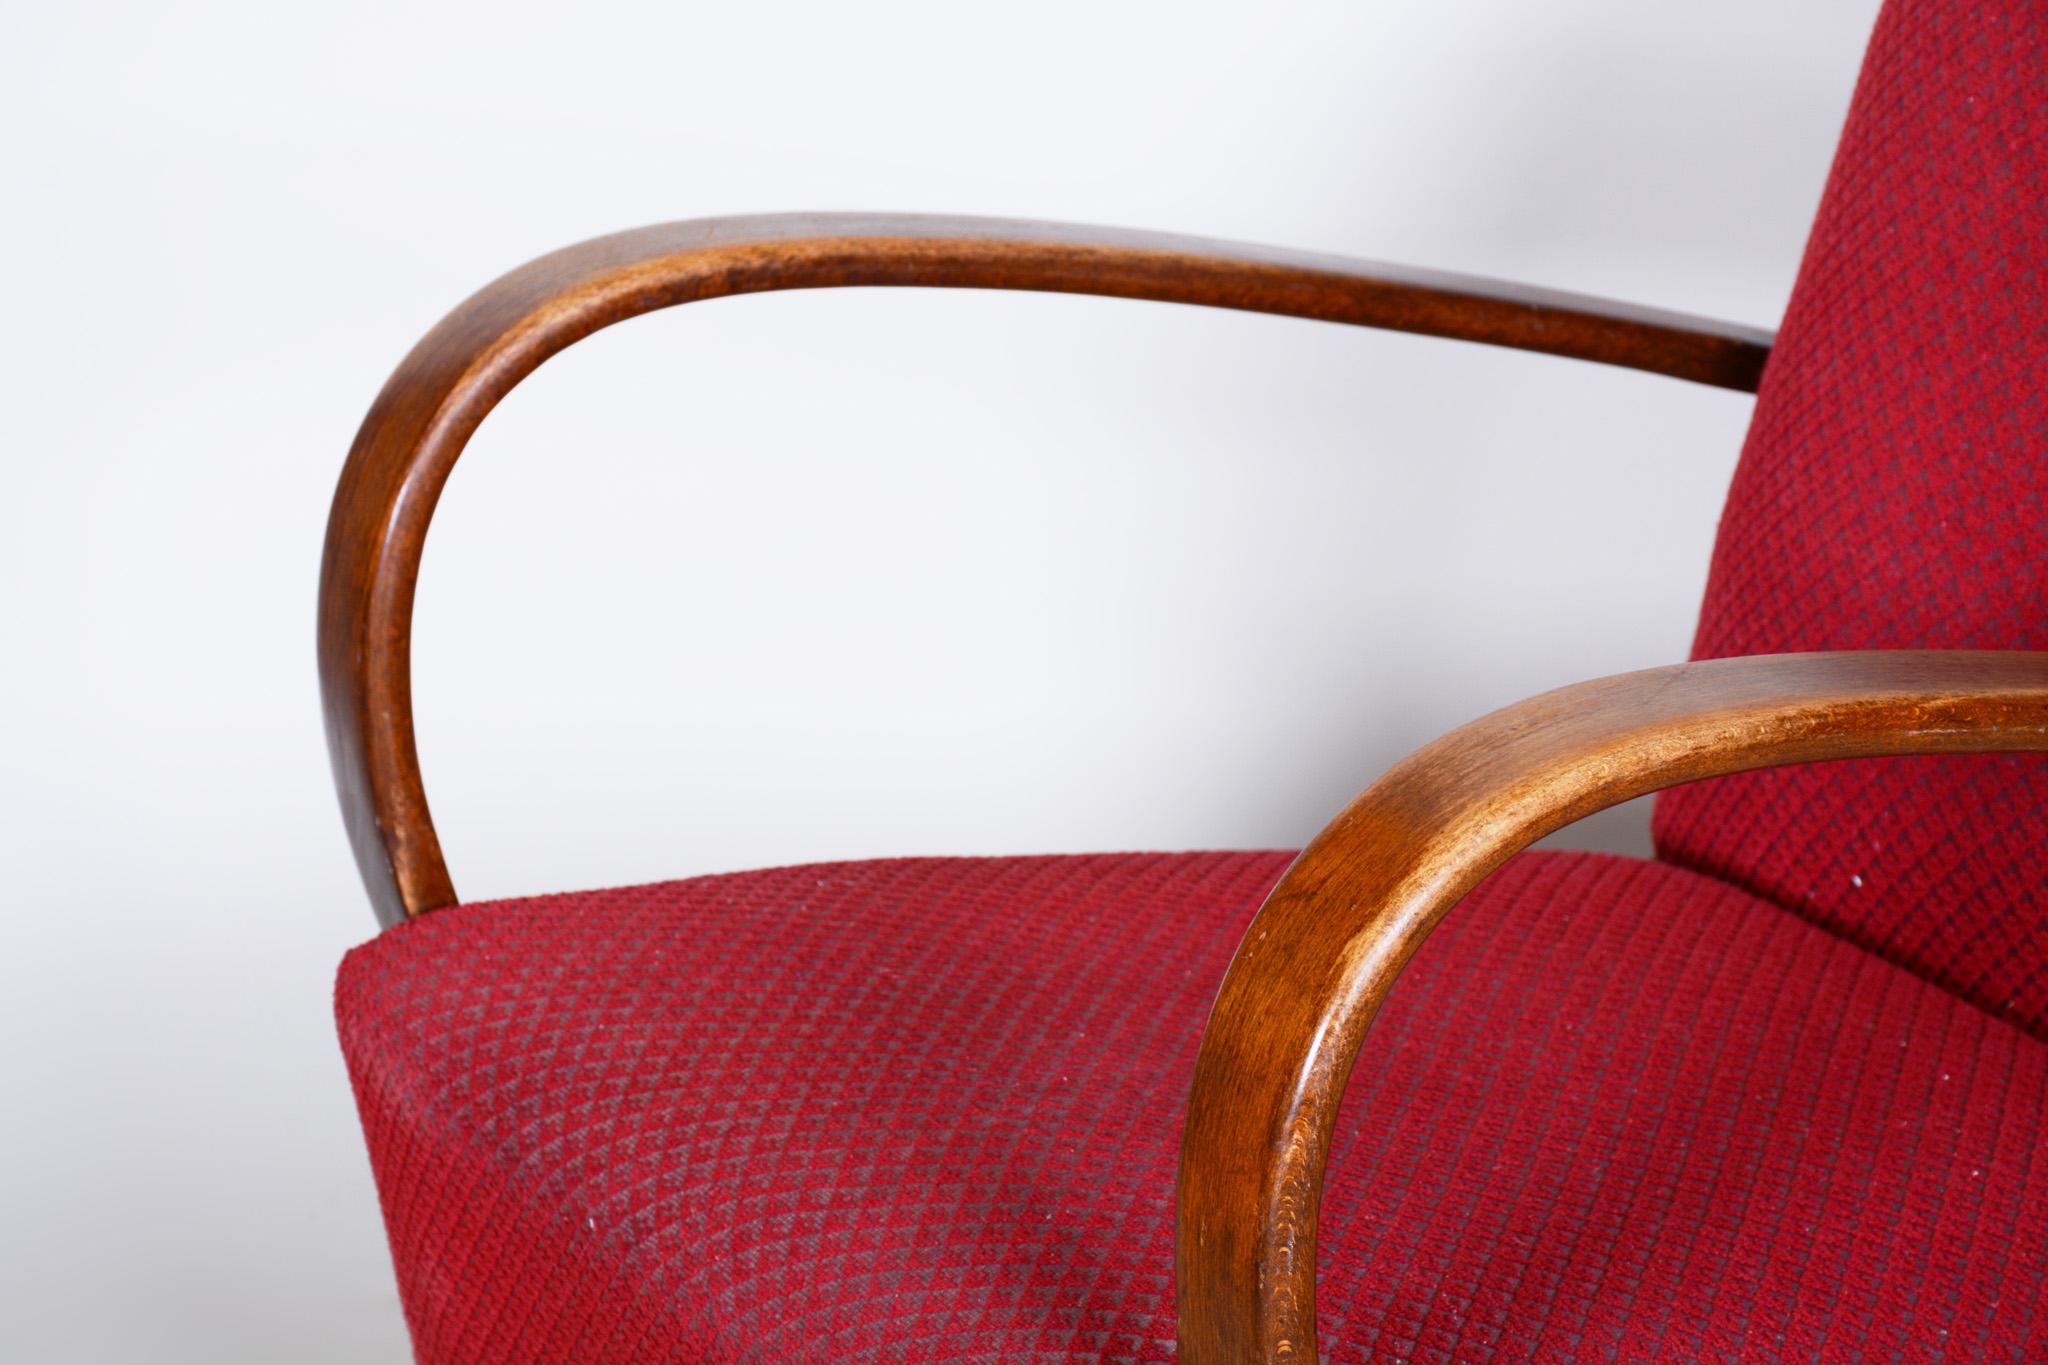 20th Century Red Armchair, Made in Czechia, 1930s, Original Condition, Art Deco Style For Sale